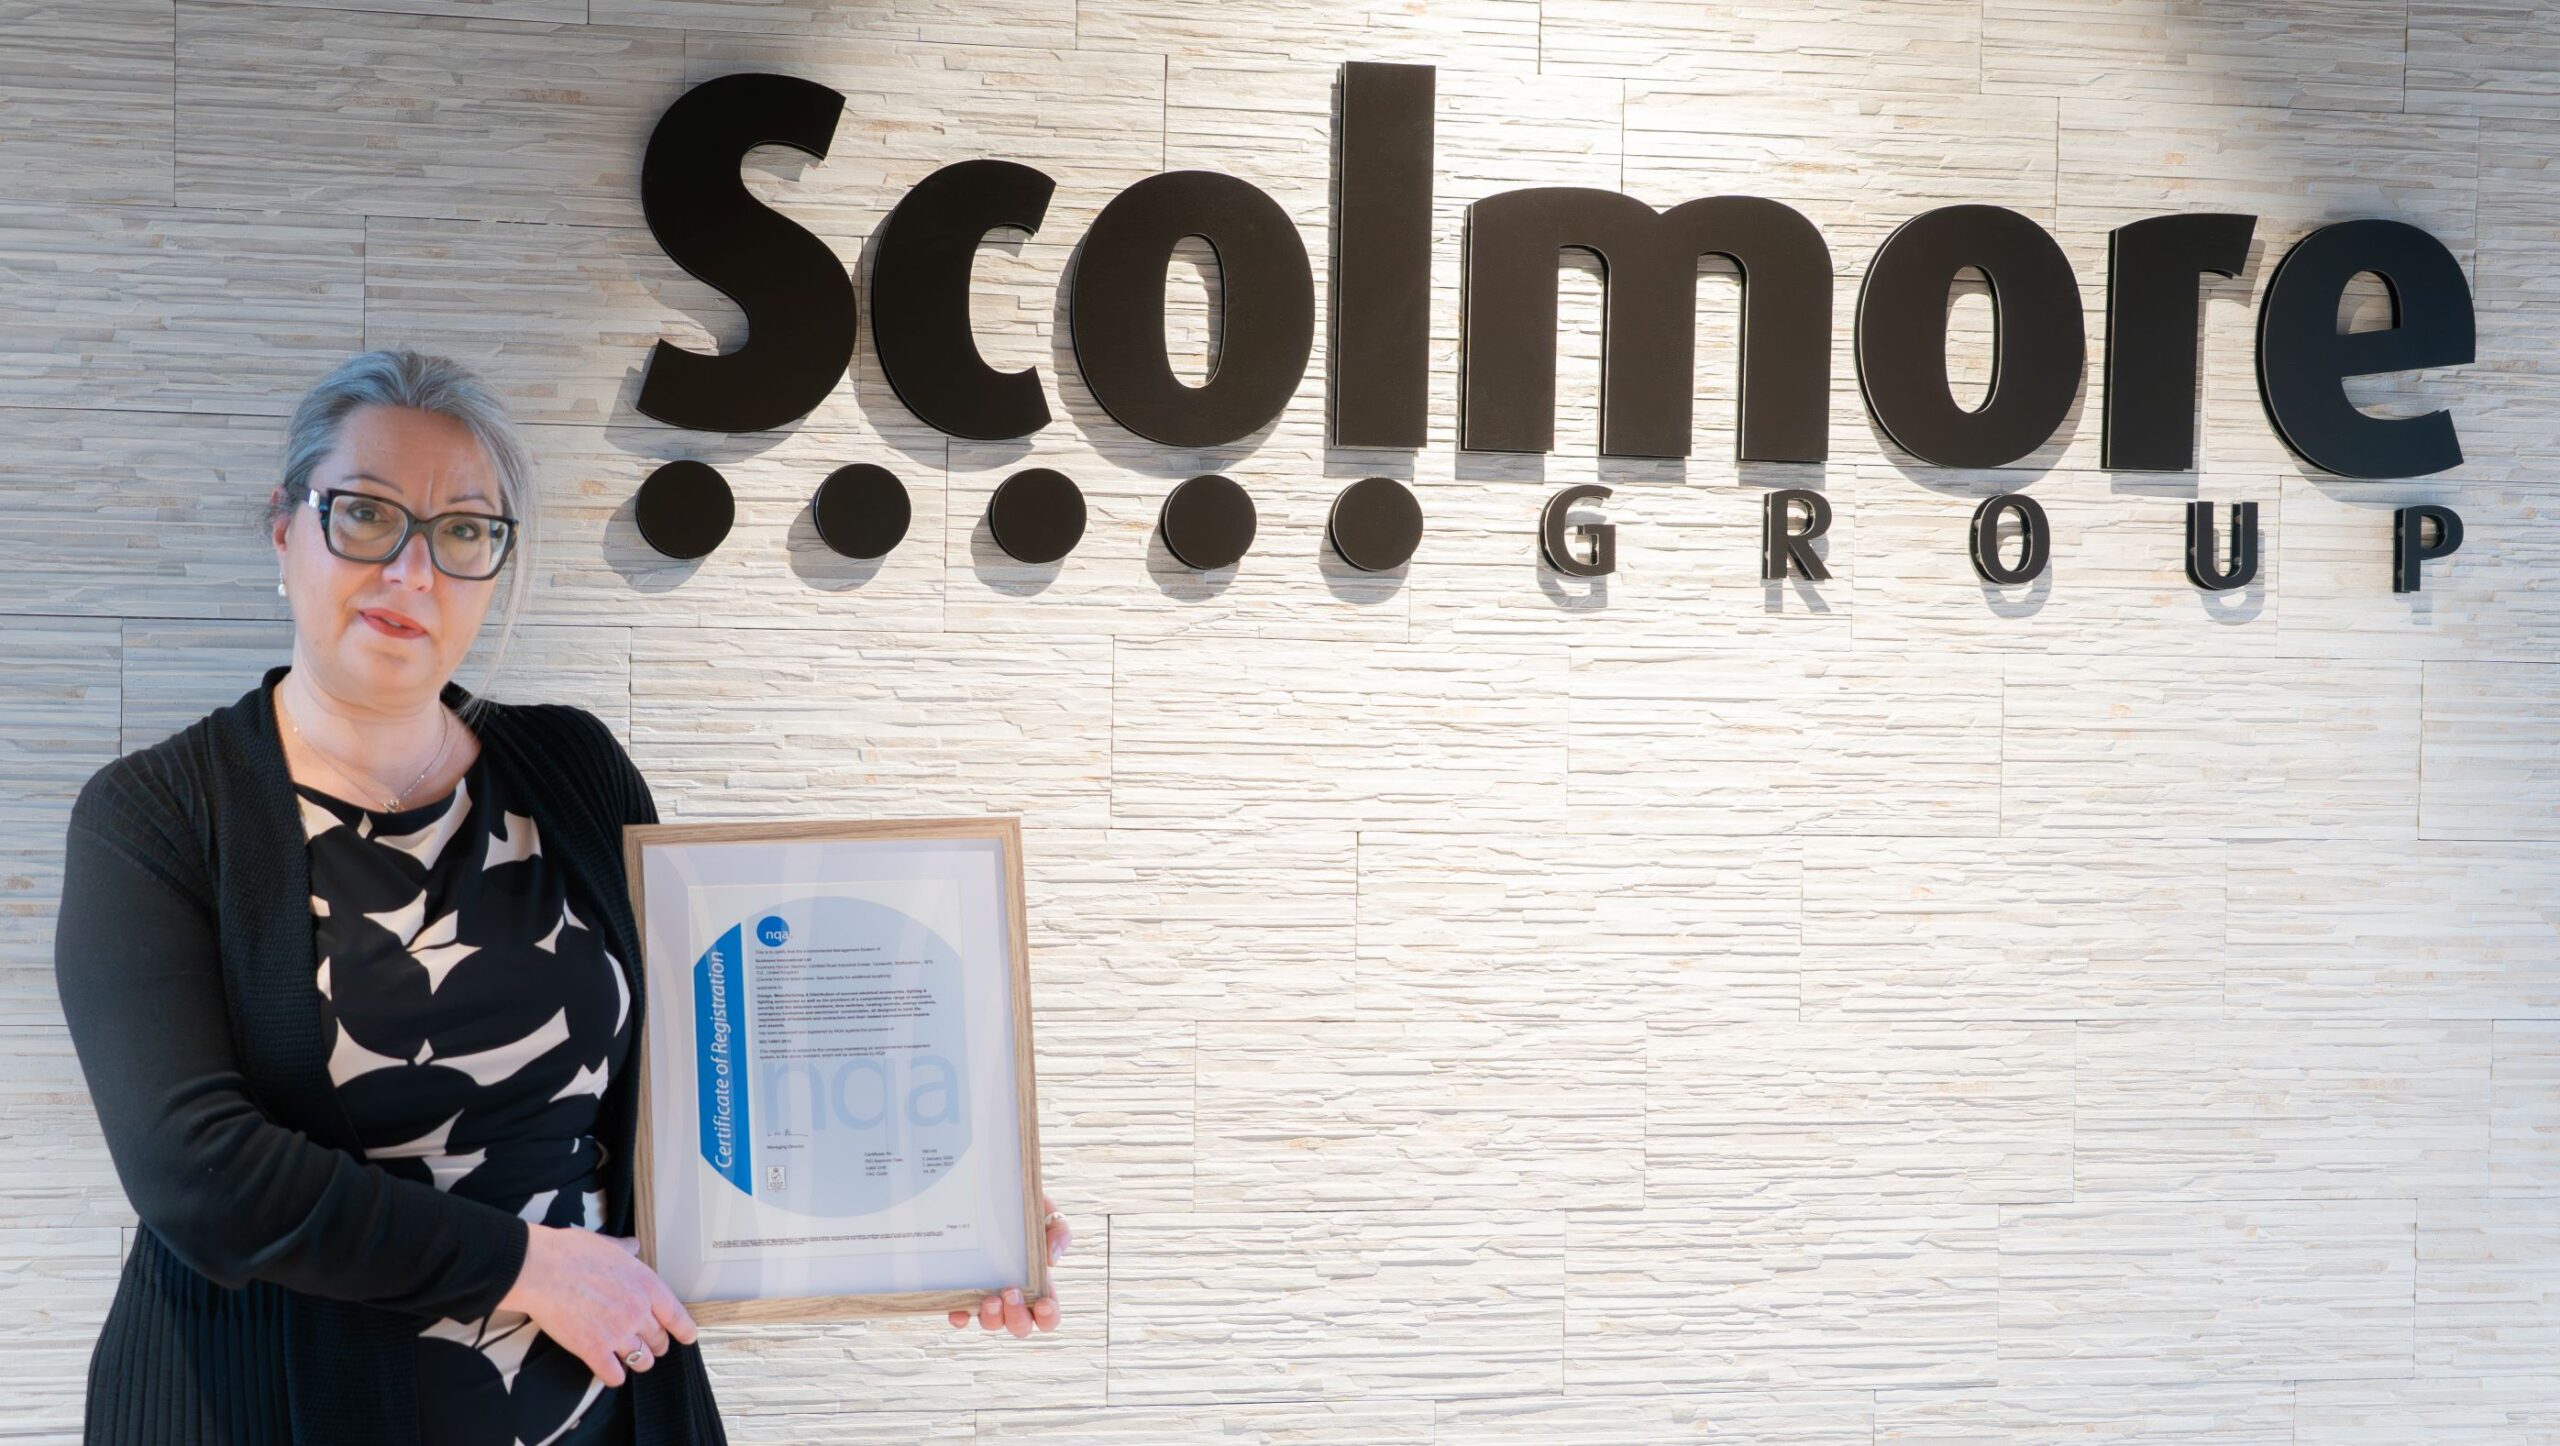 ISO14001 Certification for Scolmore Group companies